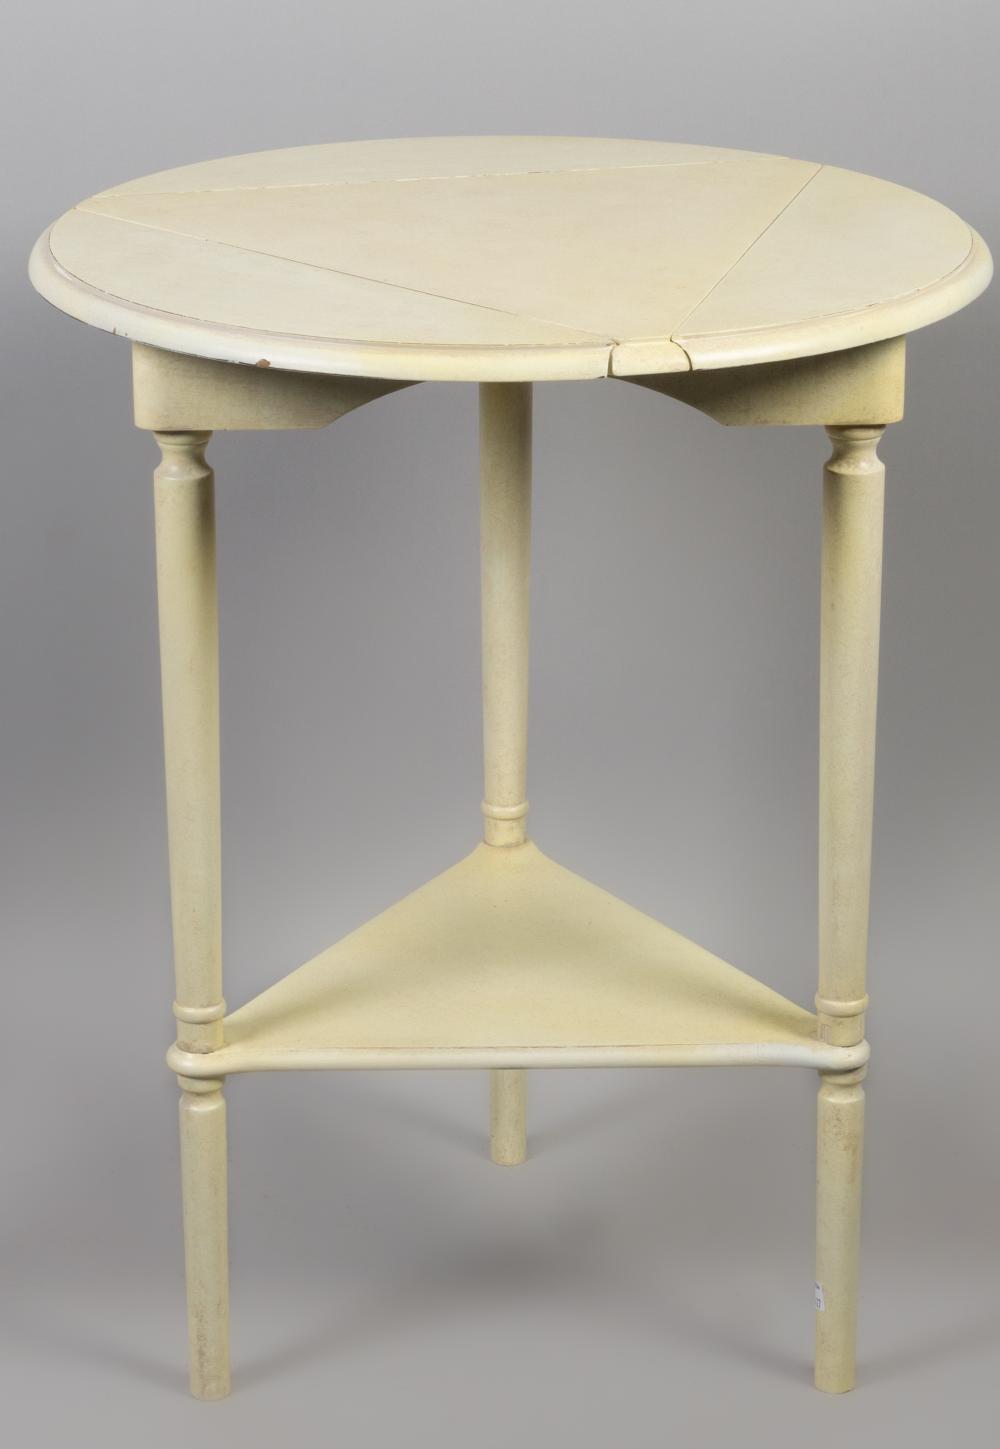 CLASSICAL STYLE CREAM PAINTED DROP LEAF 33c83b